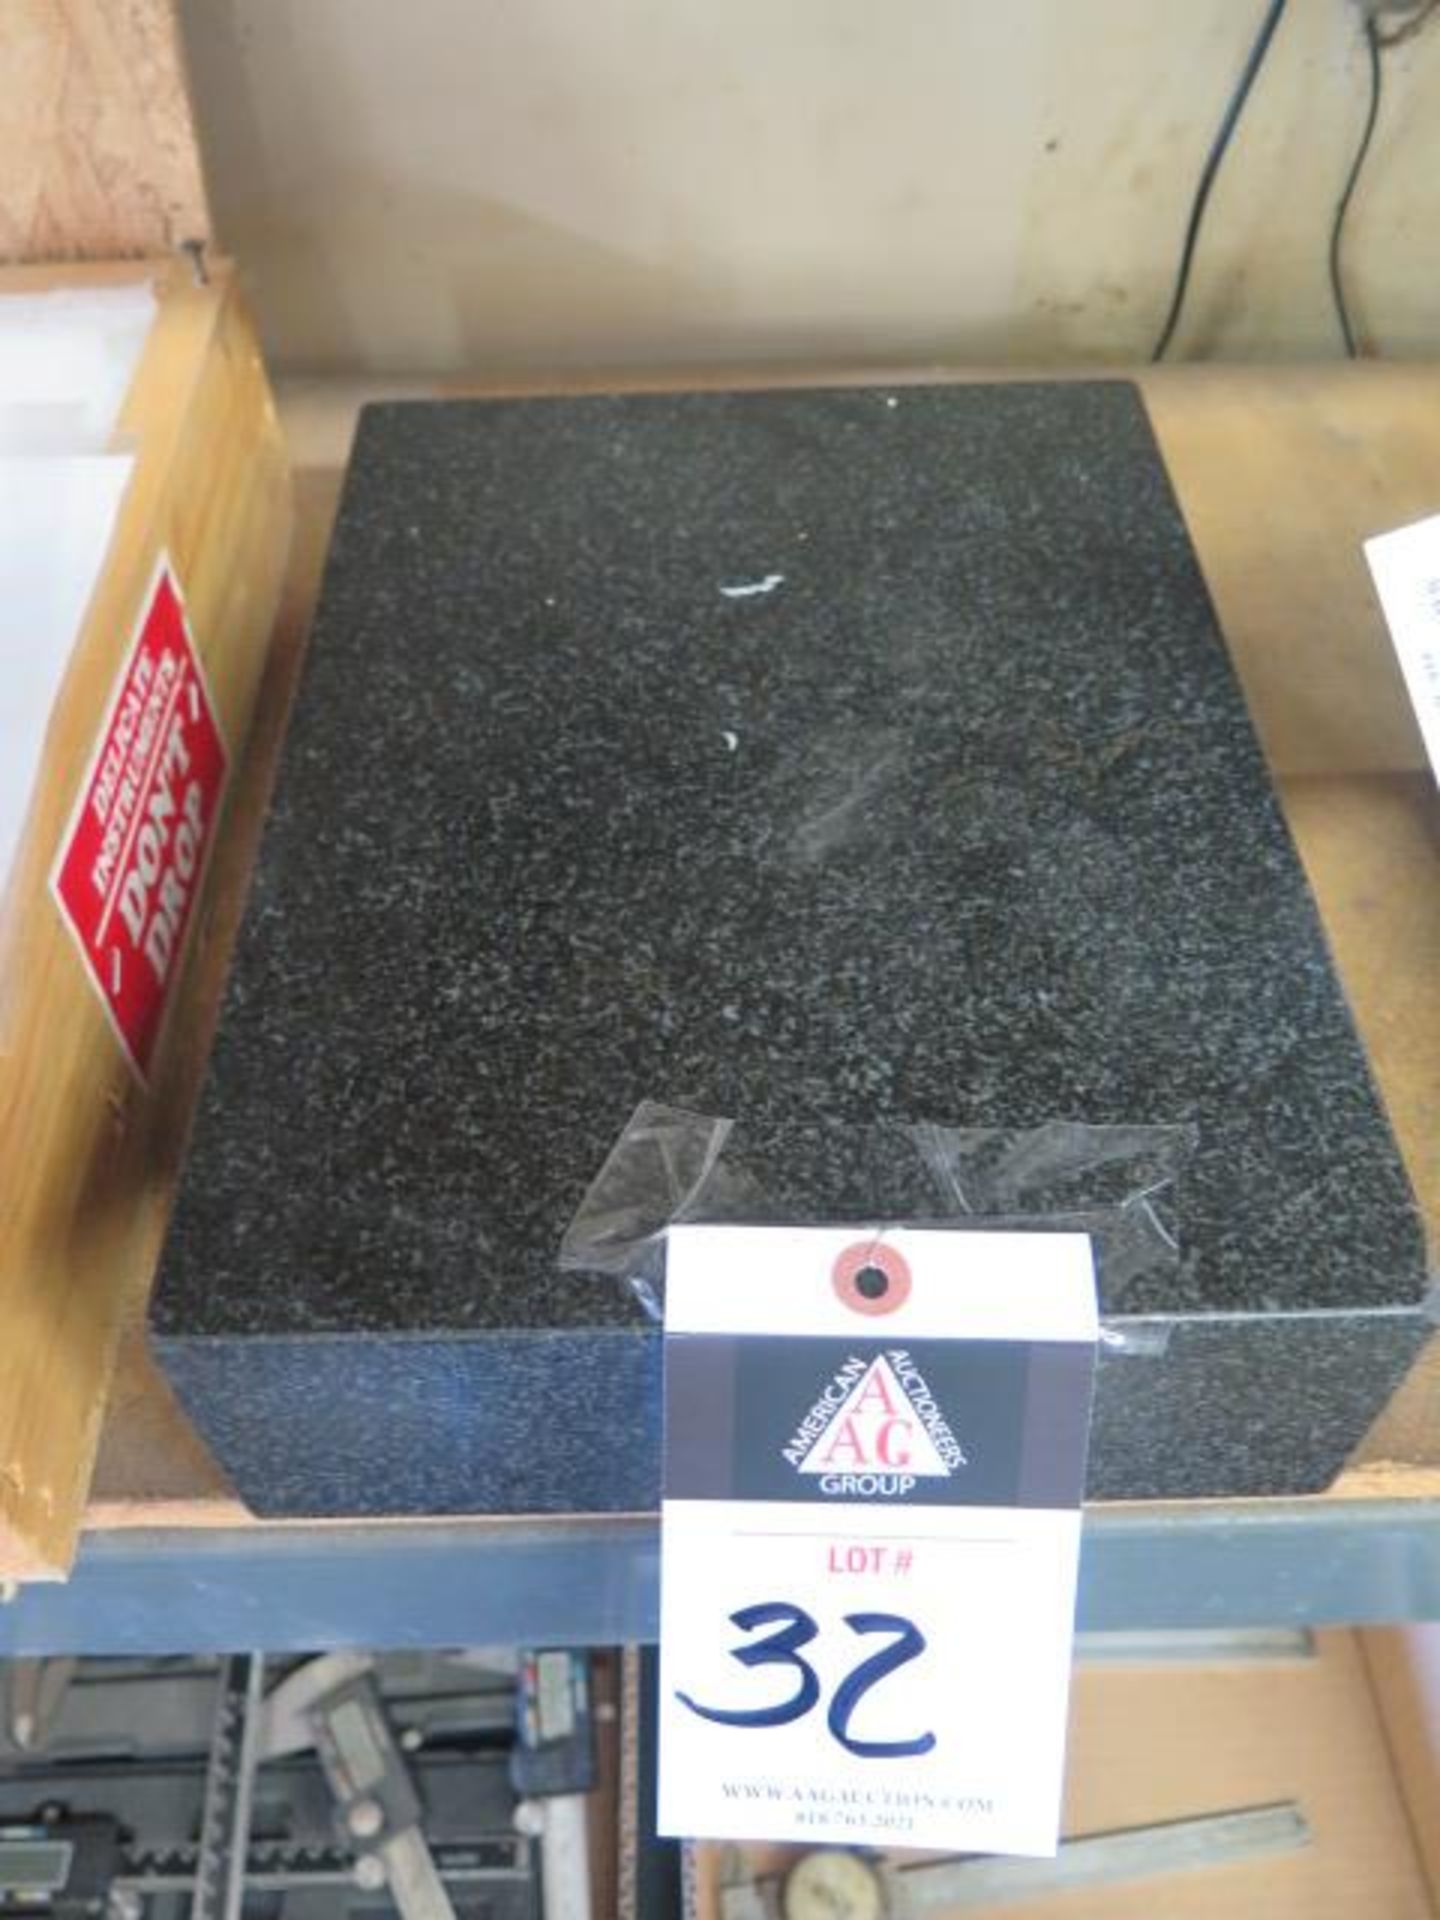 8" x 12" x 3 1/4" Granite Surface Plate (SOLD AS-IS - NO WARRANTY) - Image 2 of 3